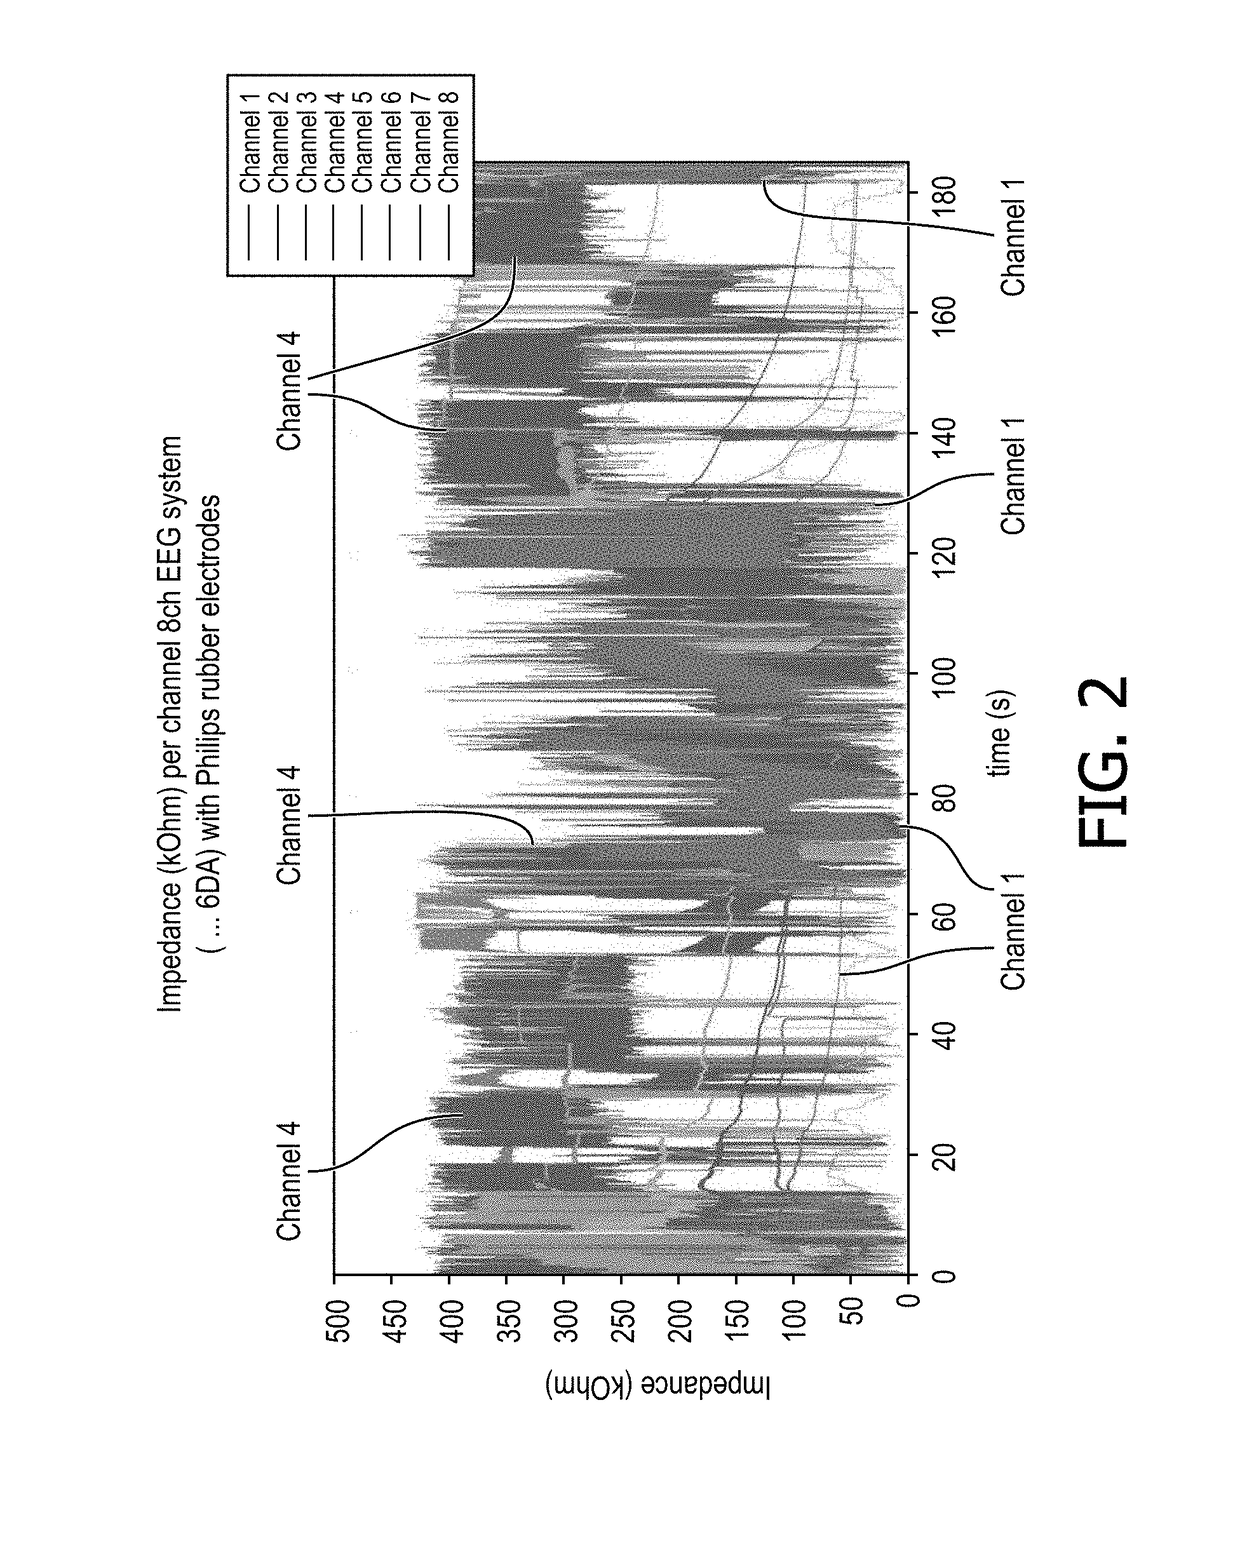 Method and system for obtaining signals from dry eeg electrodes